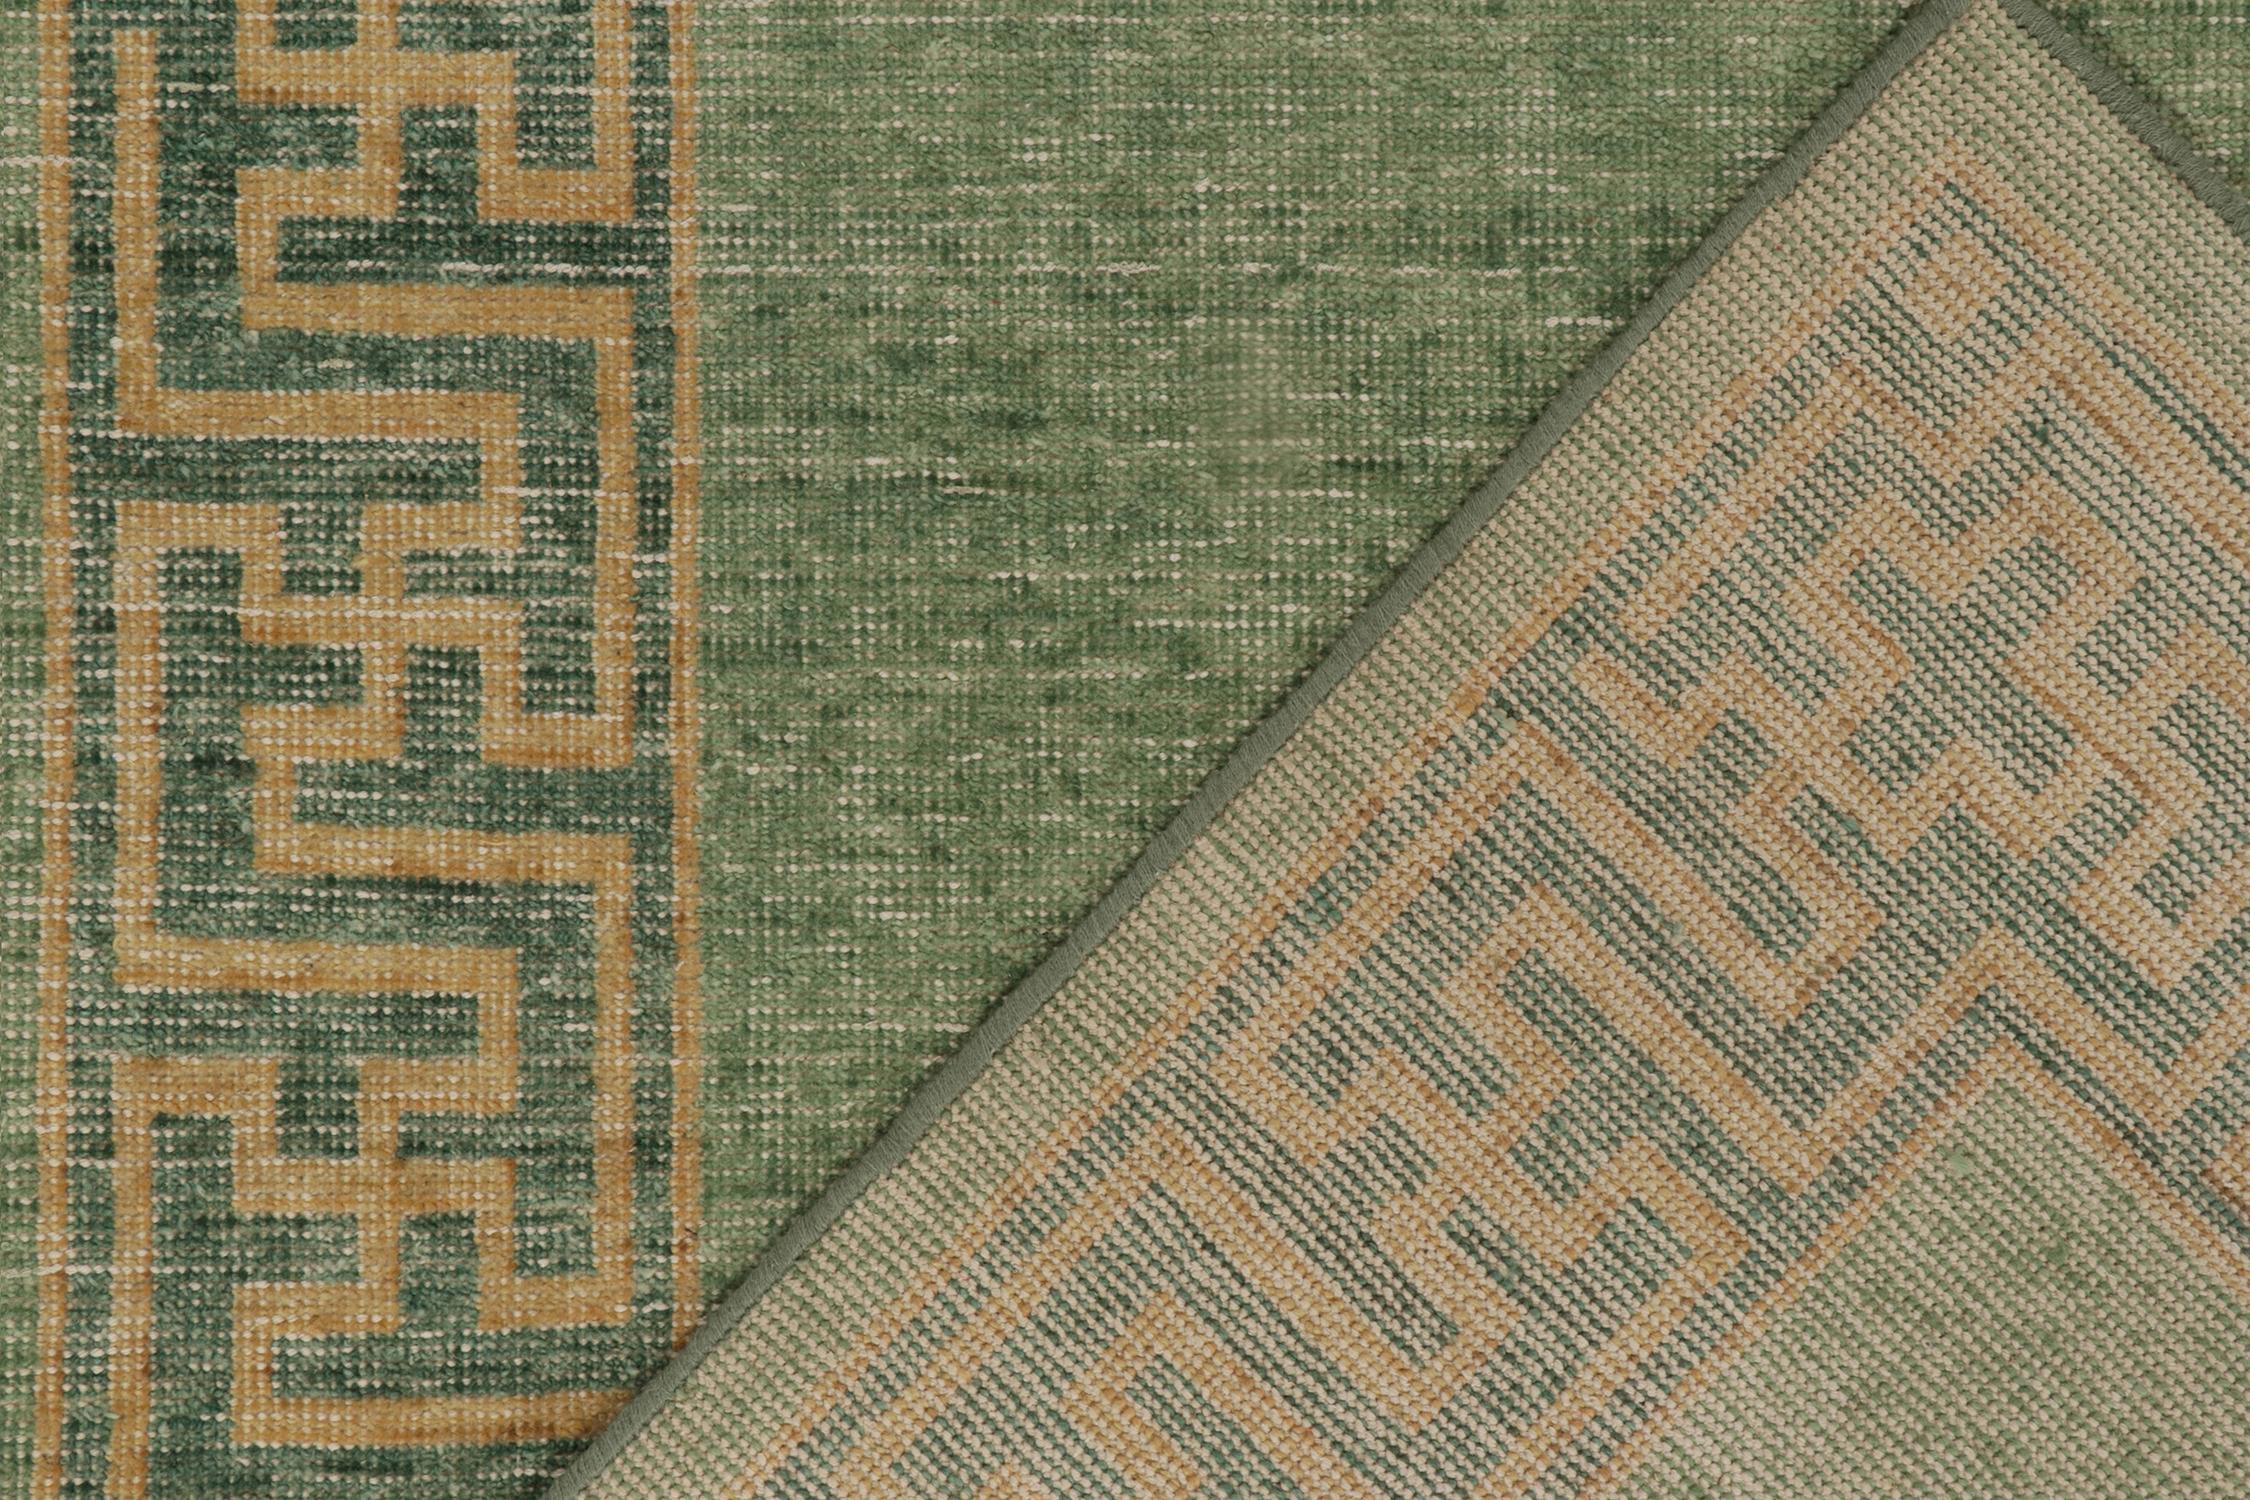 Rug & Kilim’s Distressed Tiger Skin Style Rug in Green, Beige & Black Pictorial In New Condition For Sale In Long Island City, NY